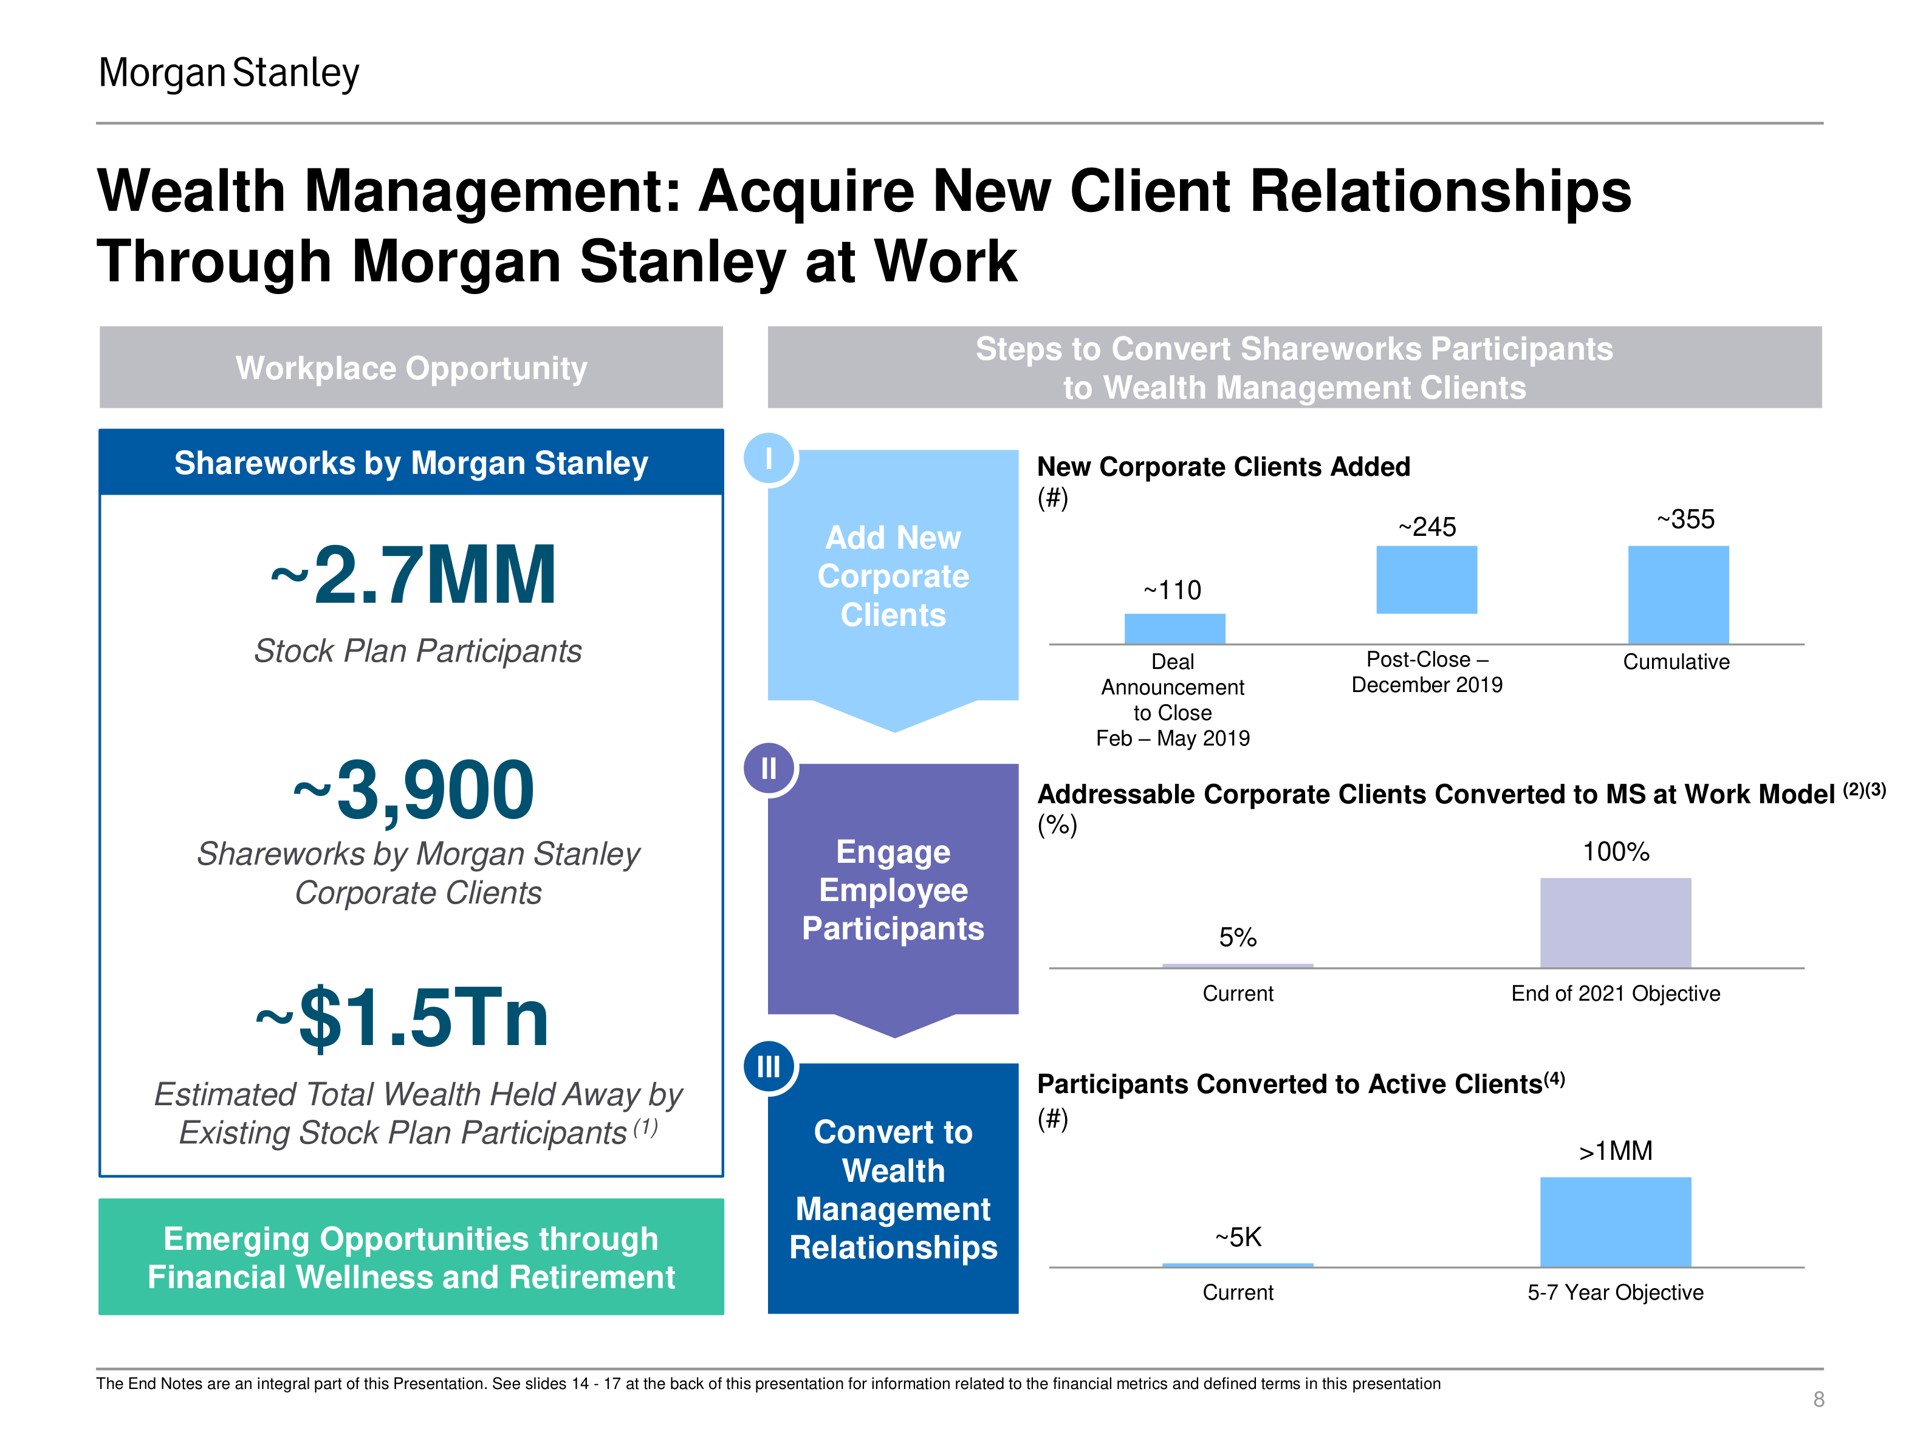 no content left of this line no content right of this line wealth management acquire new client relationships through morgan at work place content below this line workplace opportunity steps to convert participants to wealth management clients place content below this line by morgan i stock plan participants by morgan corporate clients estimated total wealth held away by existing stock plan participants emerging opportunities through financial wellness and retirement add new corporate clients engage employee participants convert to wealth management relationships new corporate clients added corporate clients converted to at work model participants converted to active clients no content right of this line source and footnotes guideline no content left of this line | Morgan Stanley